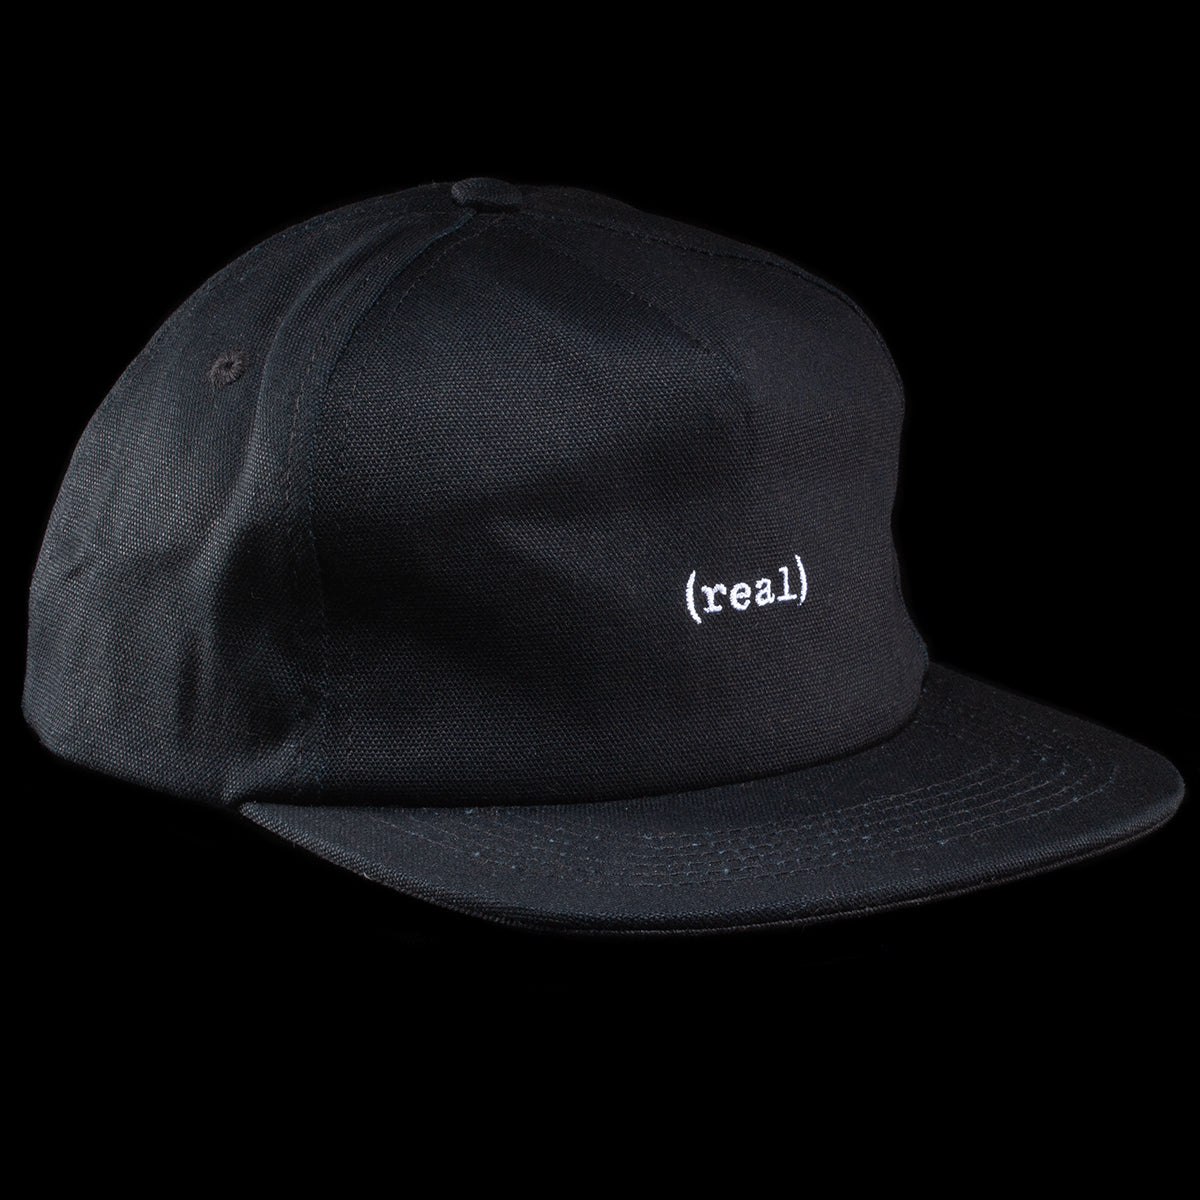 Real | Lower Hat Style # 50021052H00 Color : Black